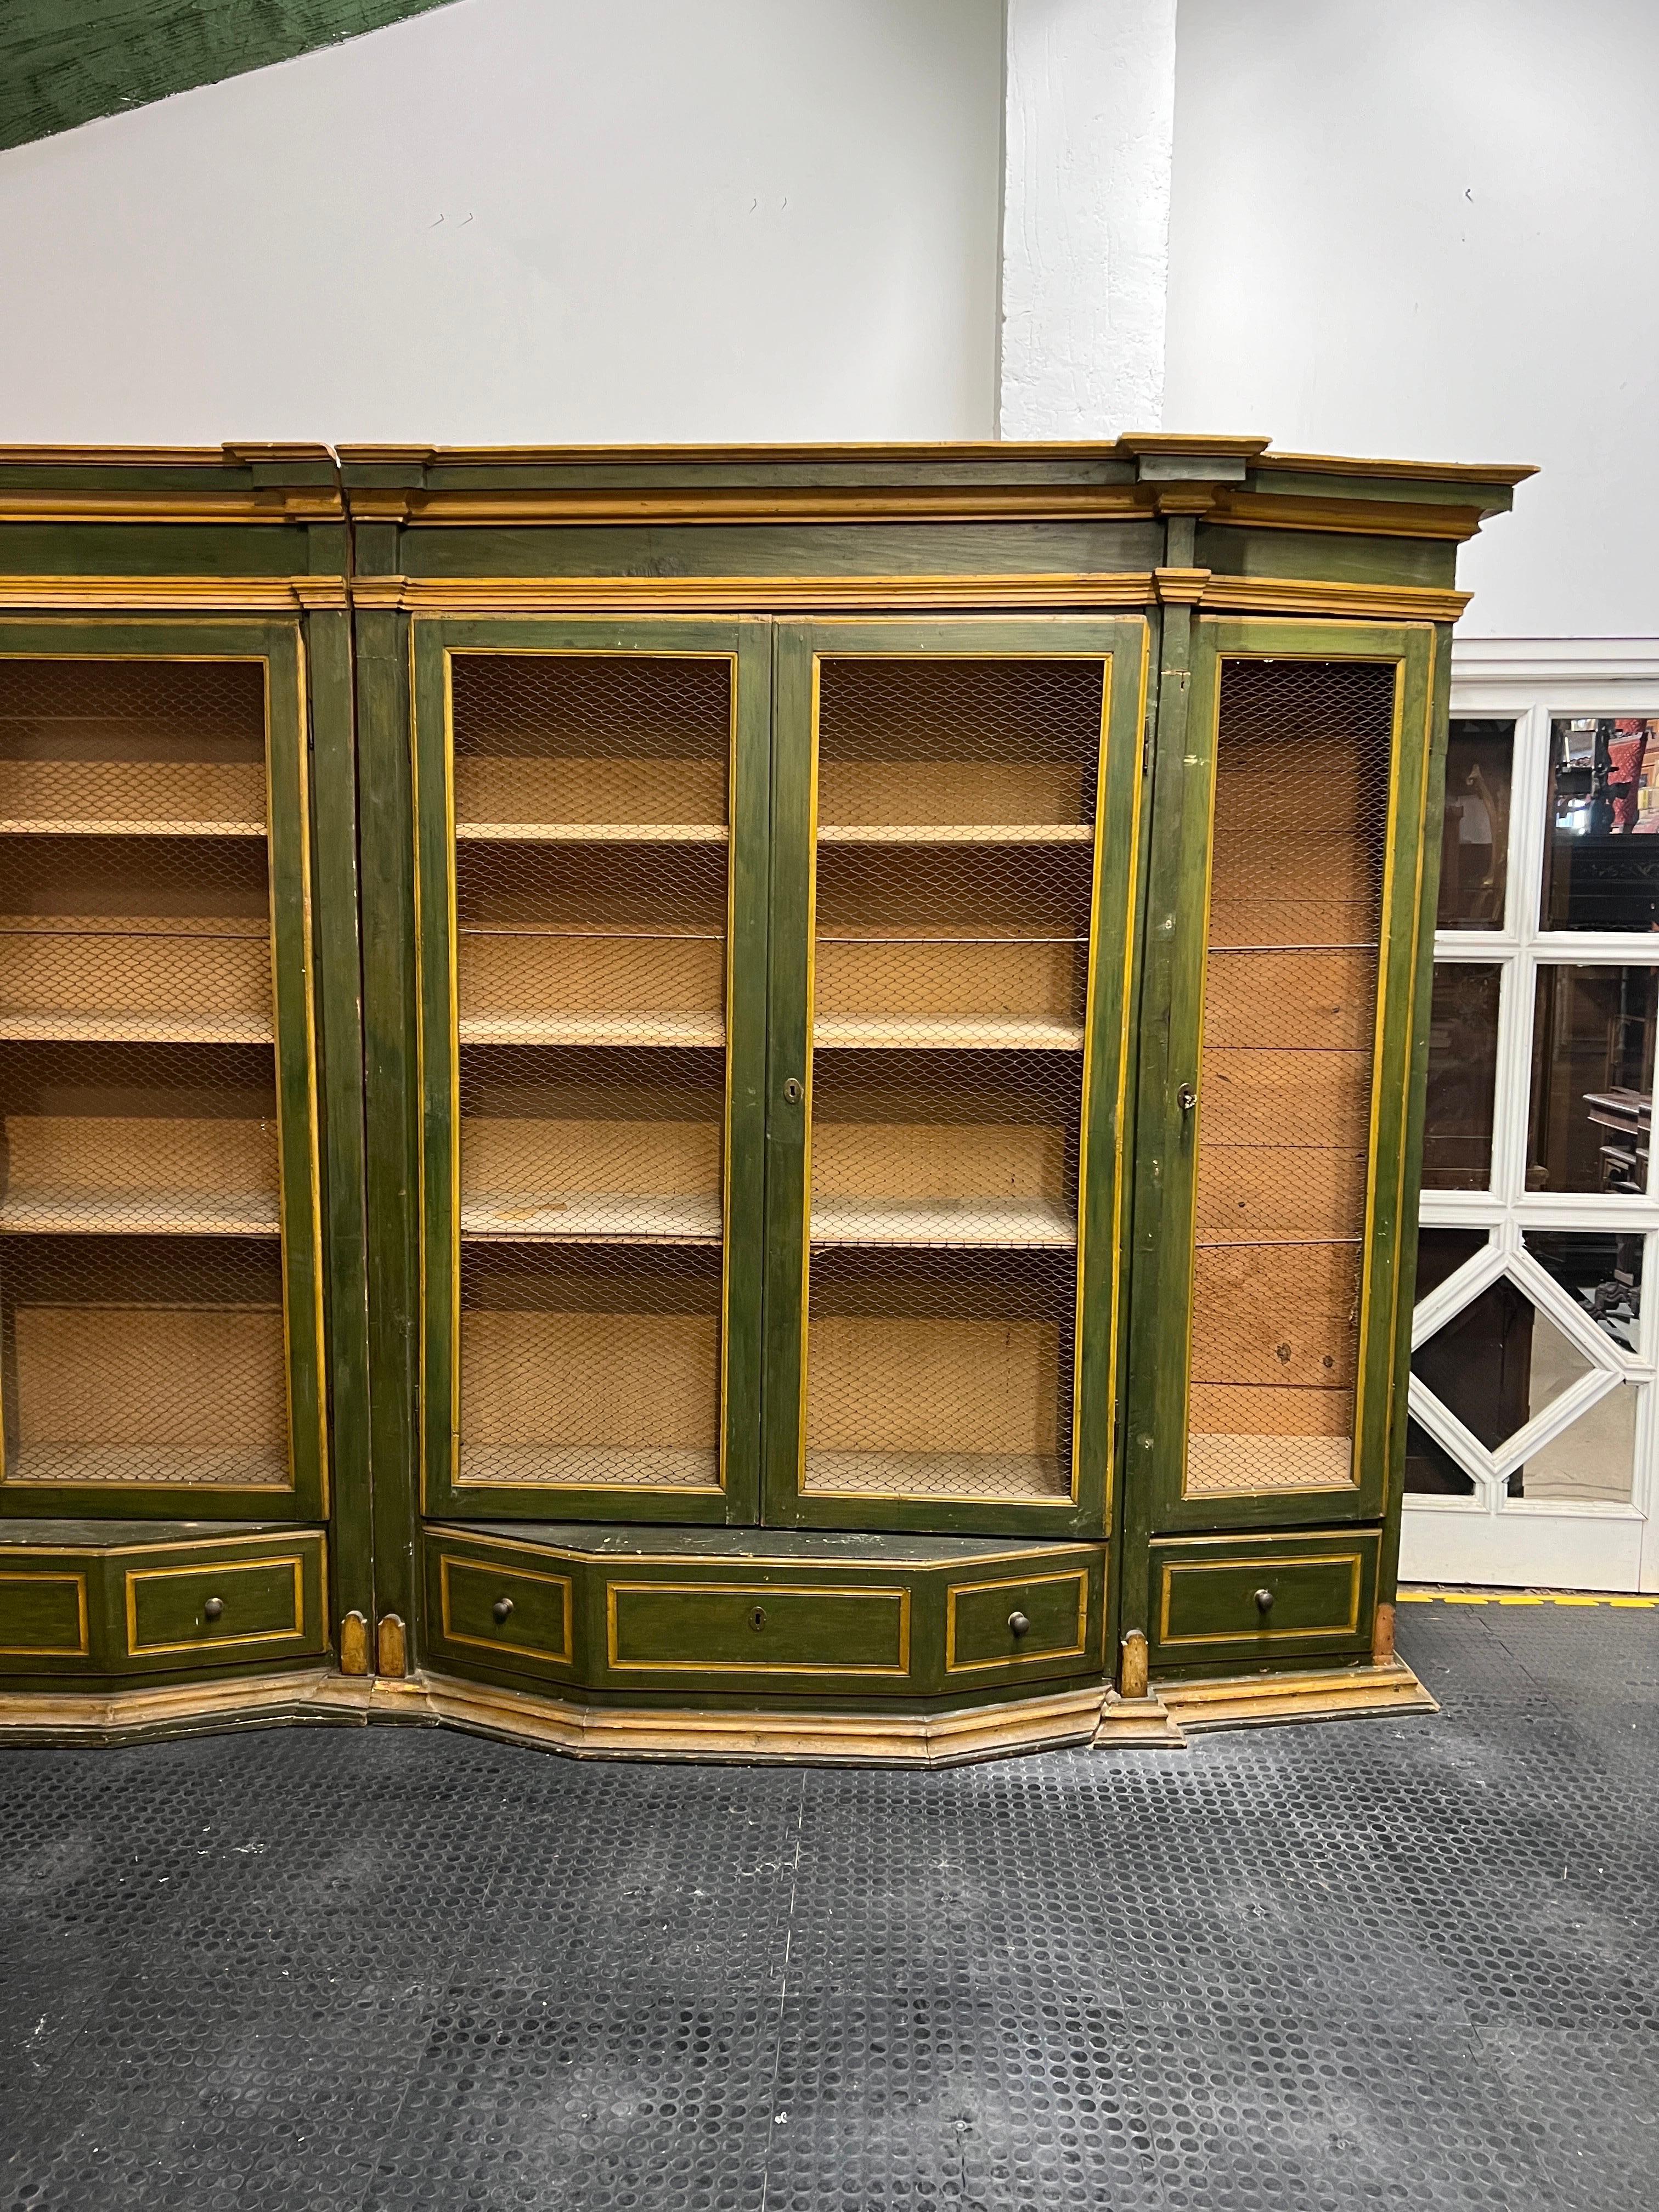 Rare Italian lacquered bookcase , luigi xv era, completely original and removable, great size and quality.
Rare and impressive piece of furniture.
In good aesthetic functional condition and in need of conservative restoration and minor